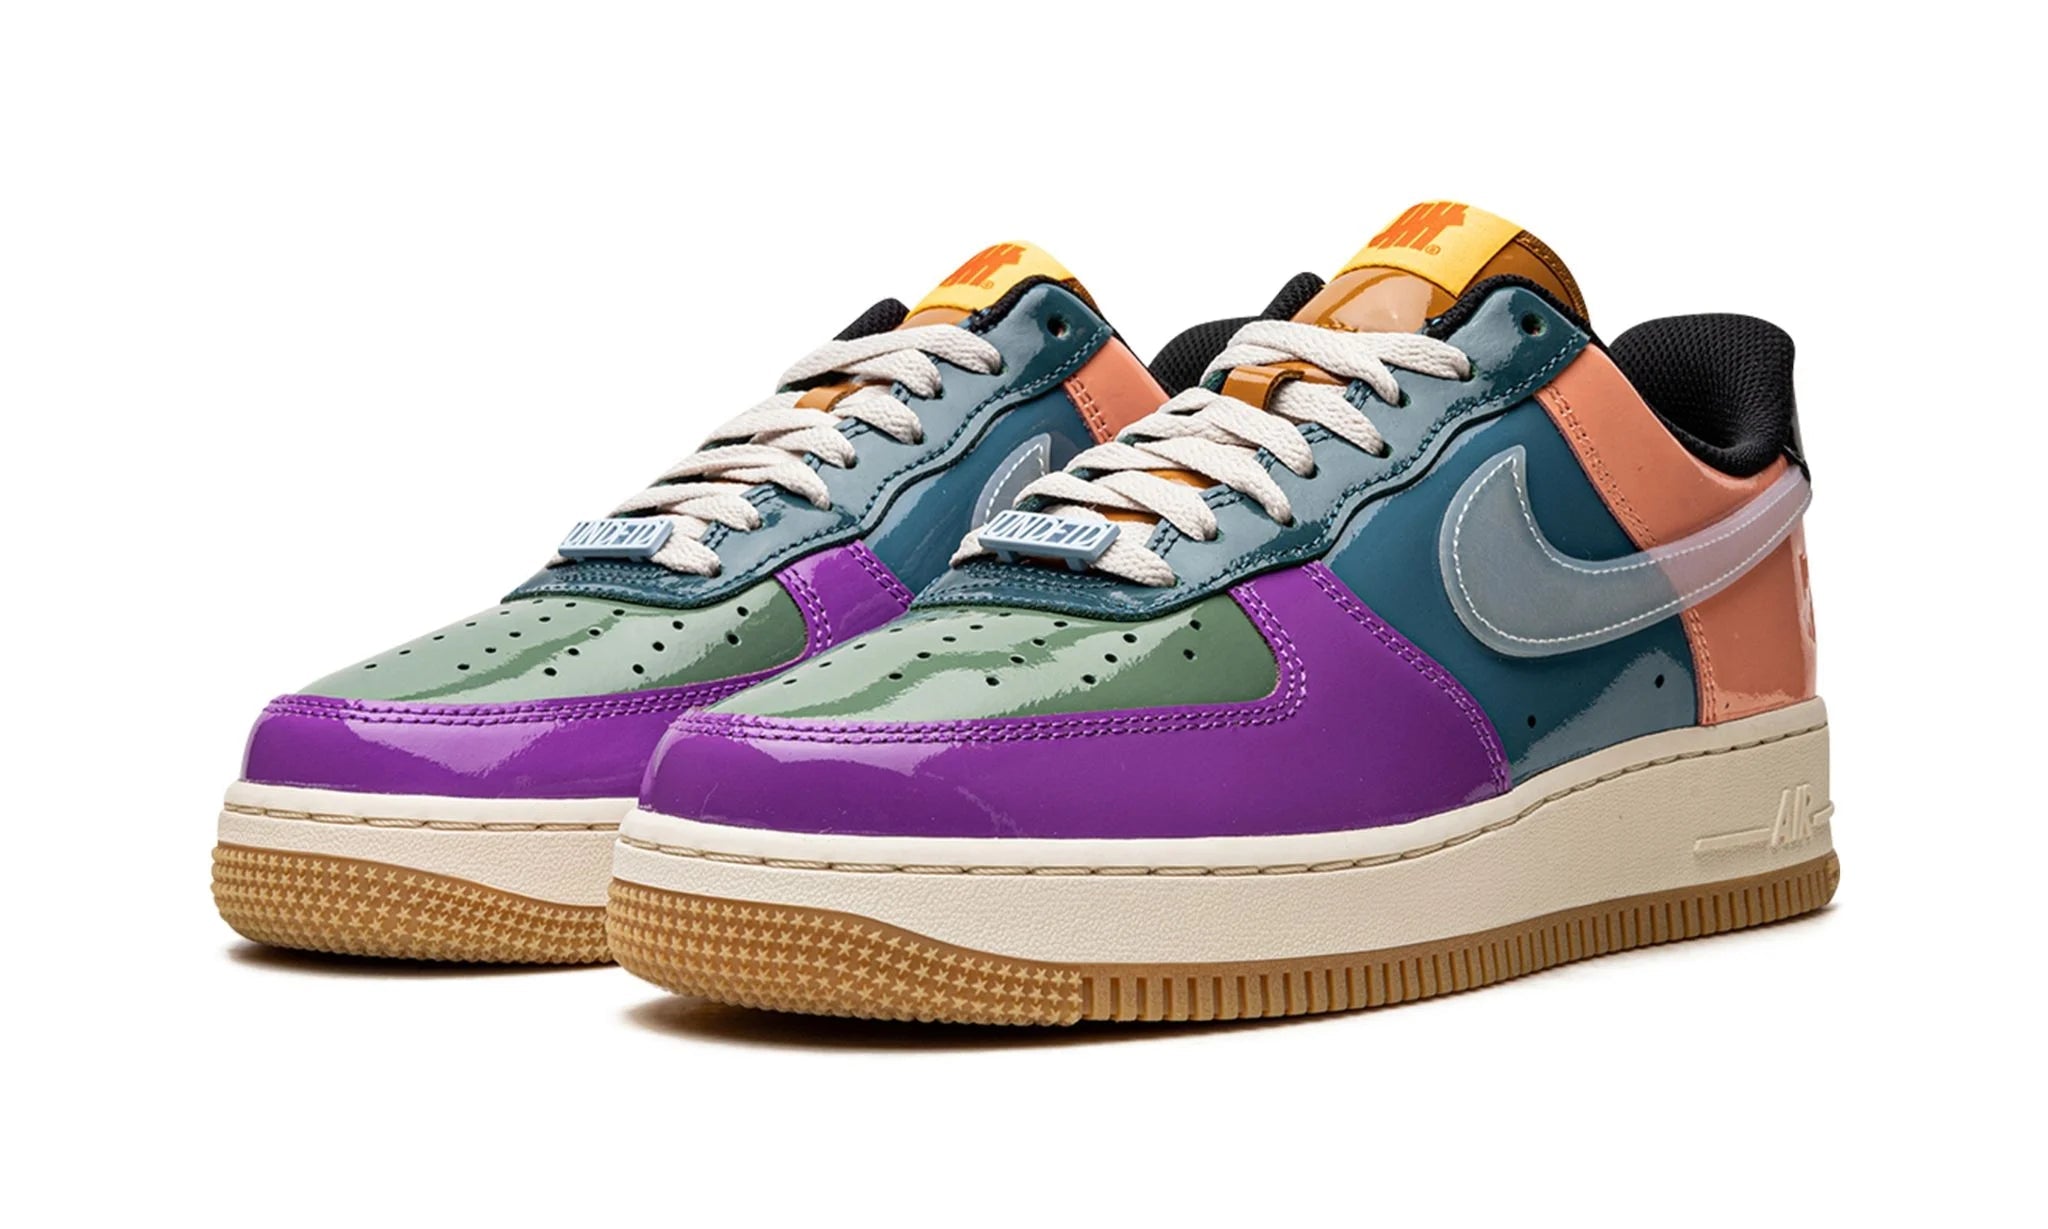 Nike Air Force 1 Low SP Undefeated Multi-Patent Wild Berry - Air Force 1 - Pirri